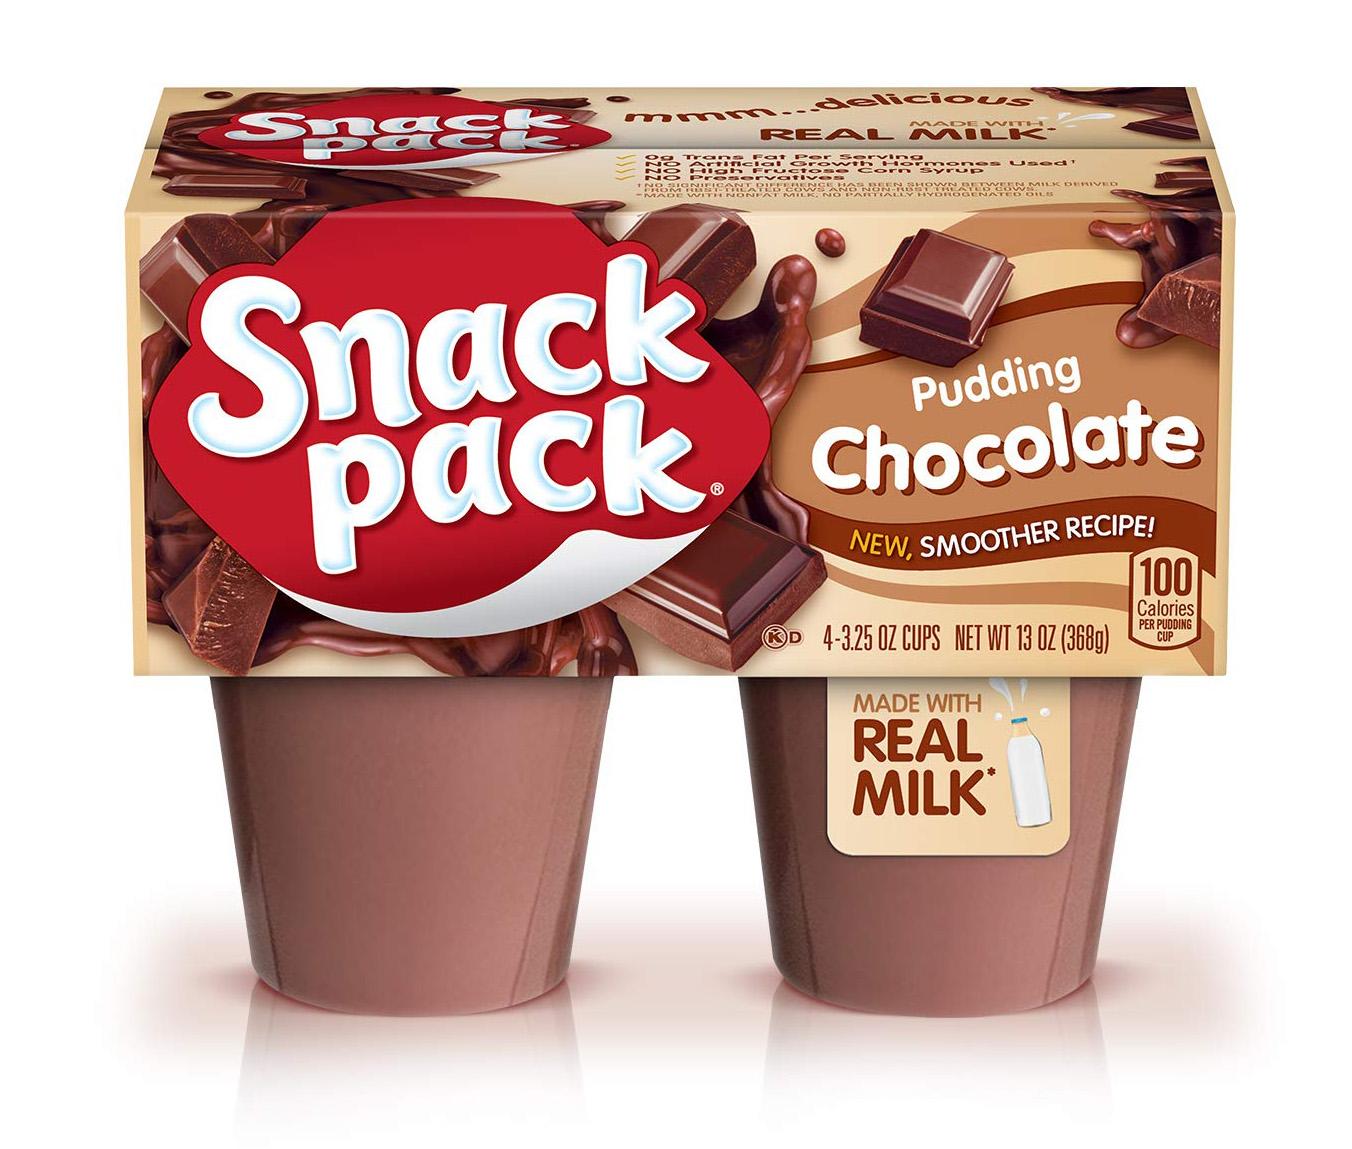 Snack Pack Pudding Cup for $0.95 Shipped